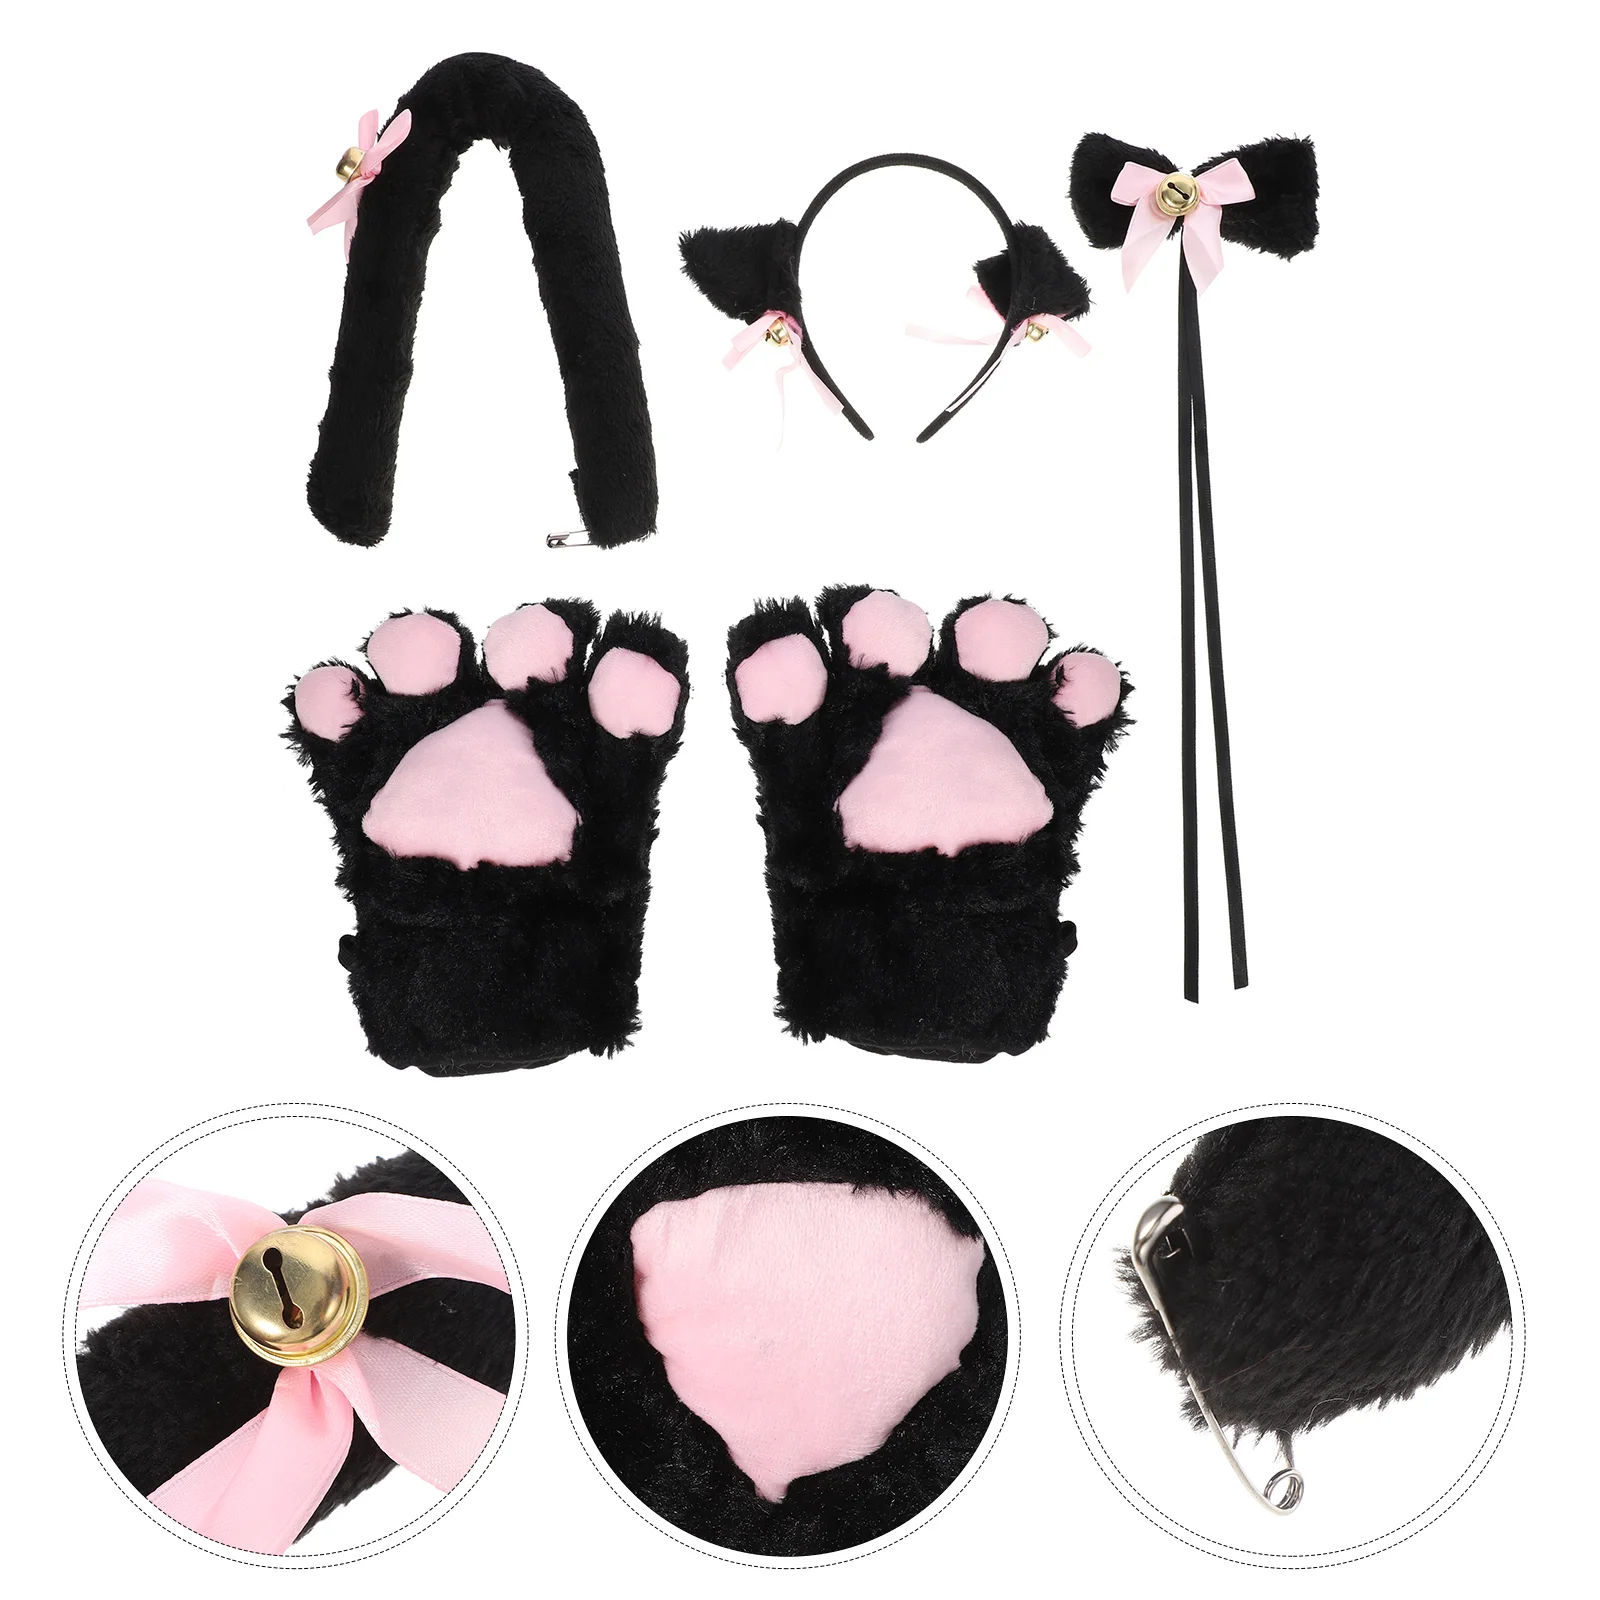 

5 Pcs Creative Cat Cosplay Costume Kitten Tail Ears Collar Paws Gloves Anime Lolita Gothic Set for Party Cosplay (Black)